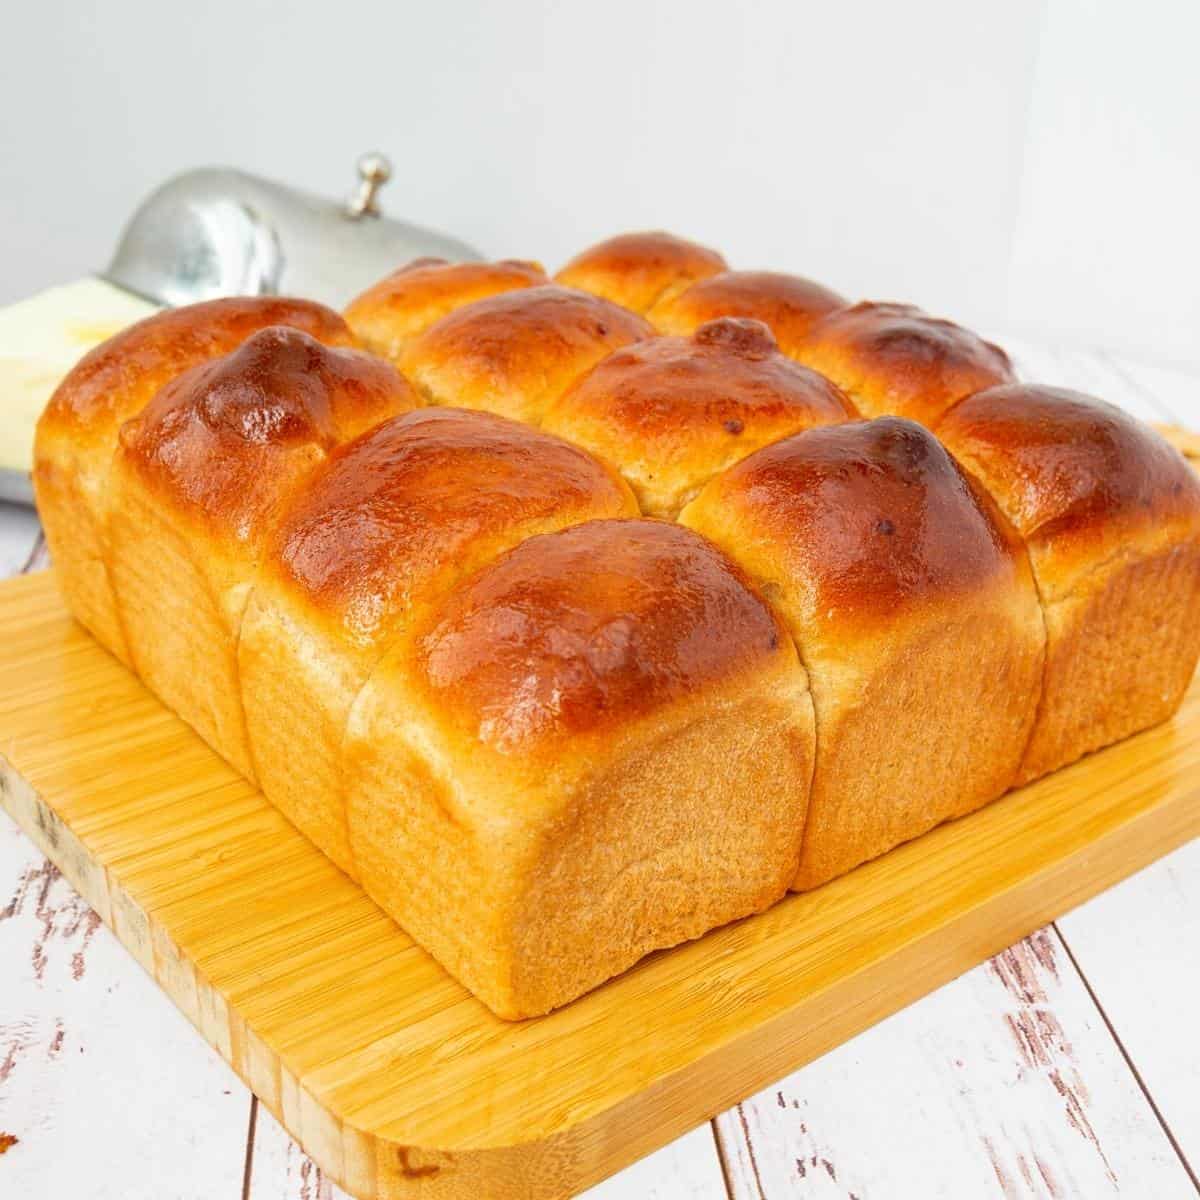 A slab of whole wheat dinner rolls on the table.